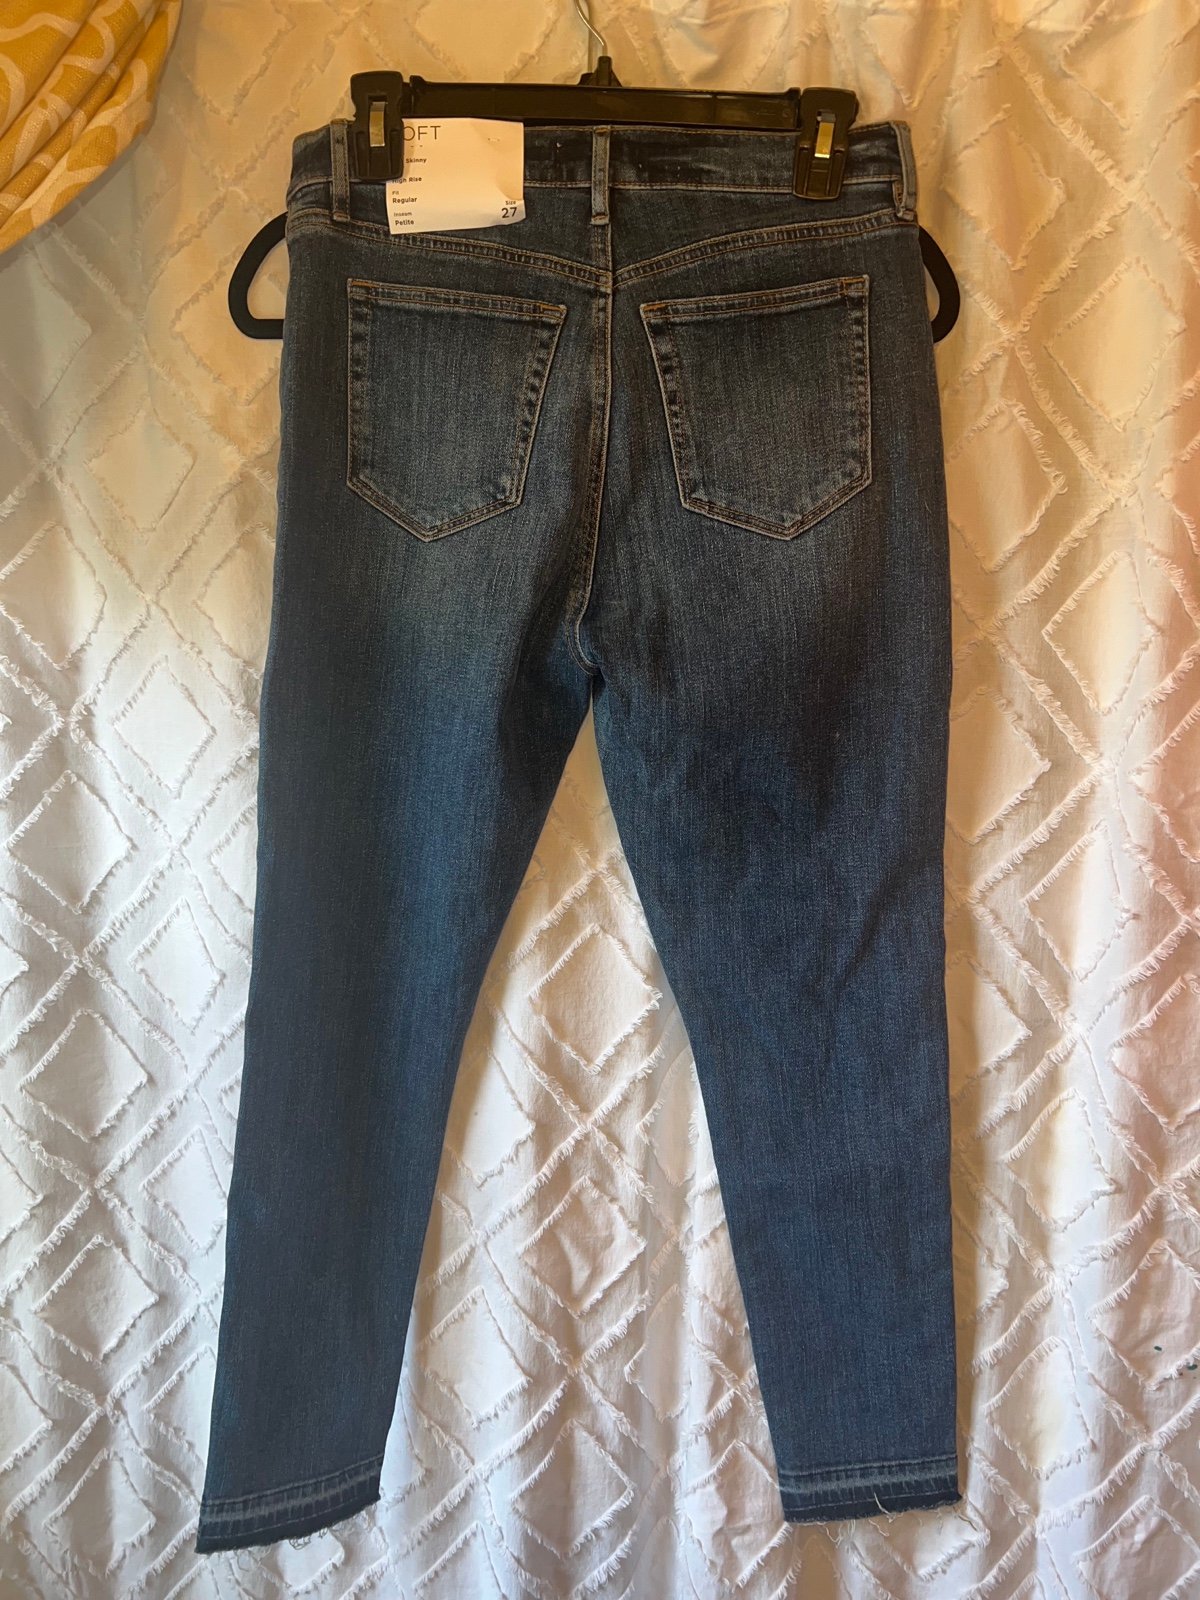 floor price NWT loft jeans HrpmlrsF9 Outlet Store